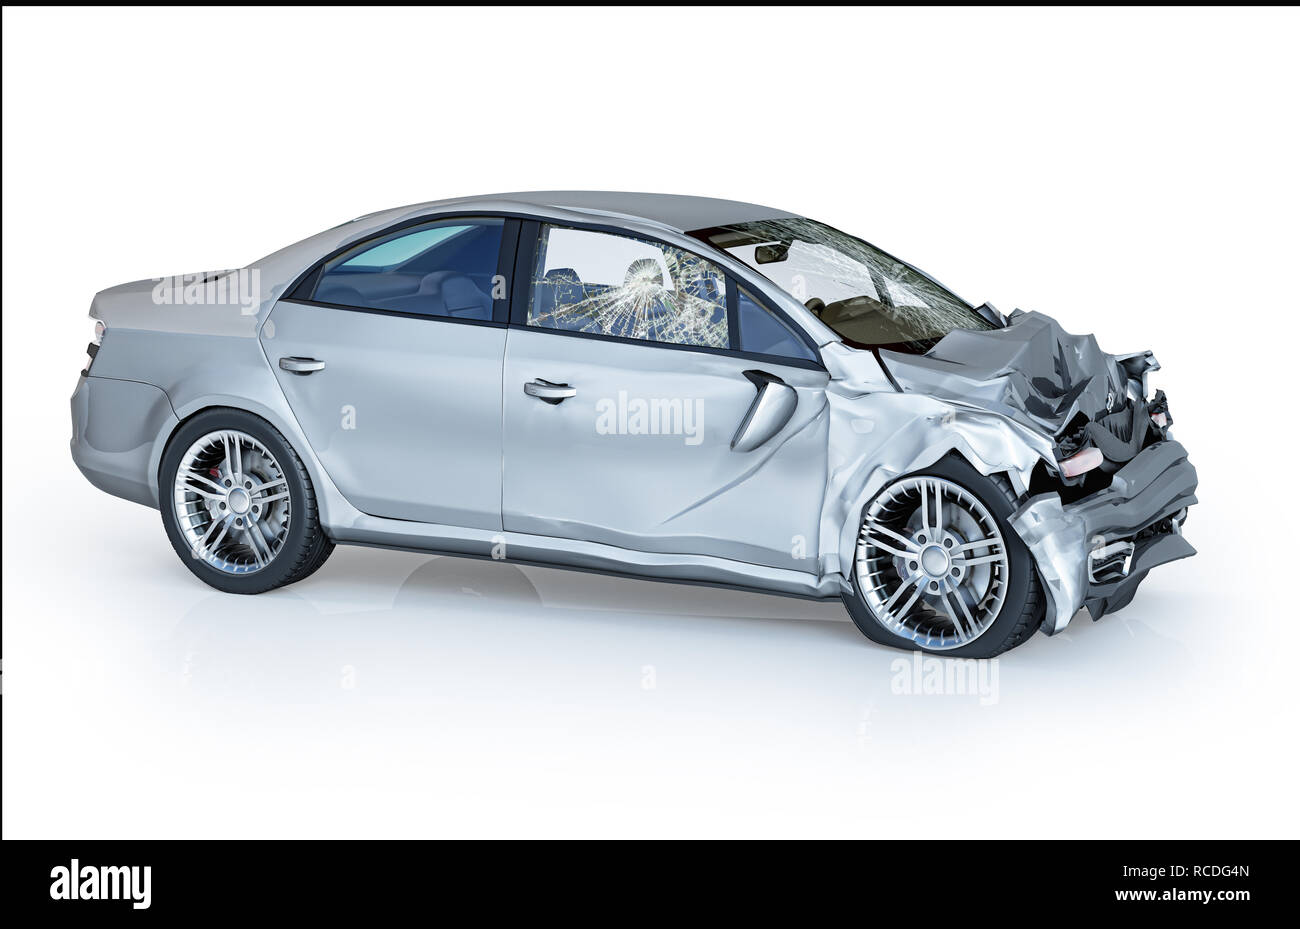 Single car crashed. Silver sedan havily damaged on the front part. Isolated on white background. Perspective view. Stock Photo